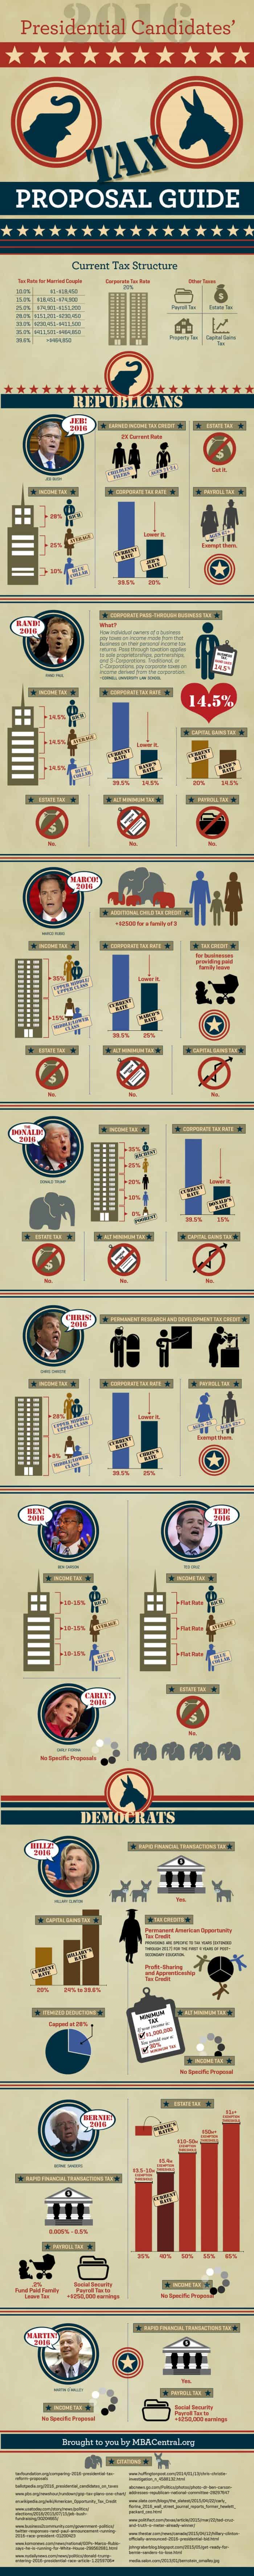 2016 Presidential Candidate Tax Proposals Guide Infographic